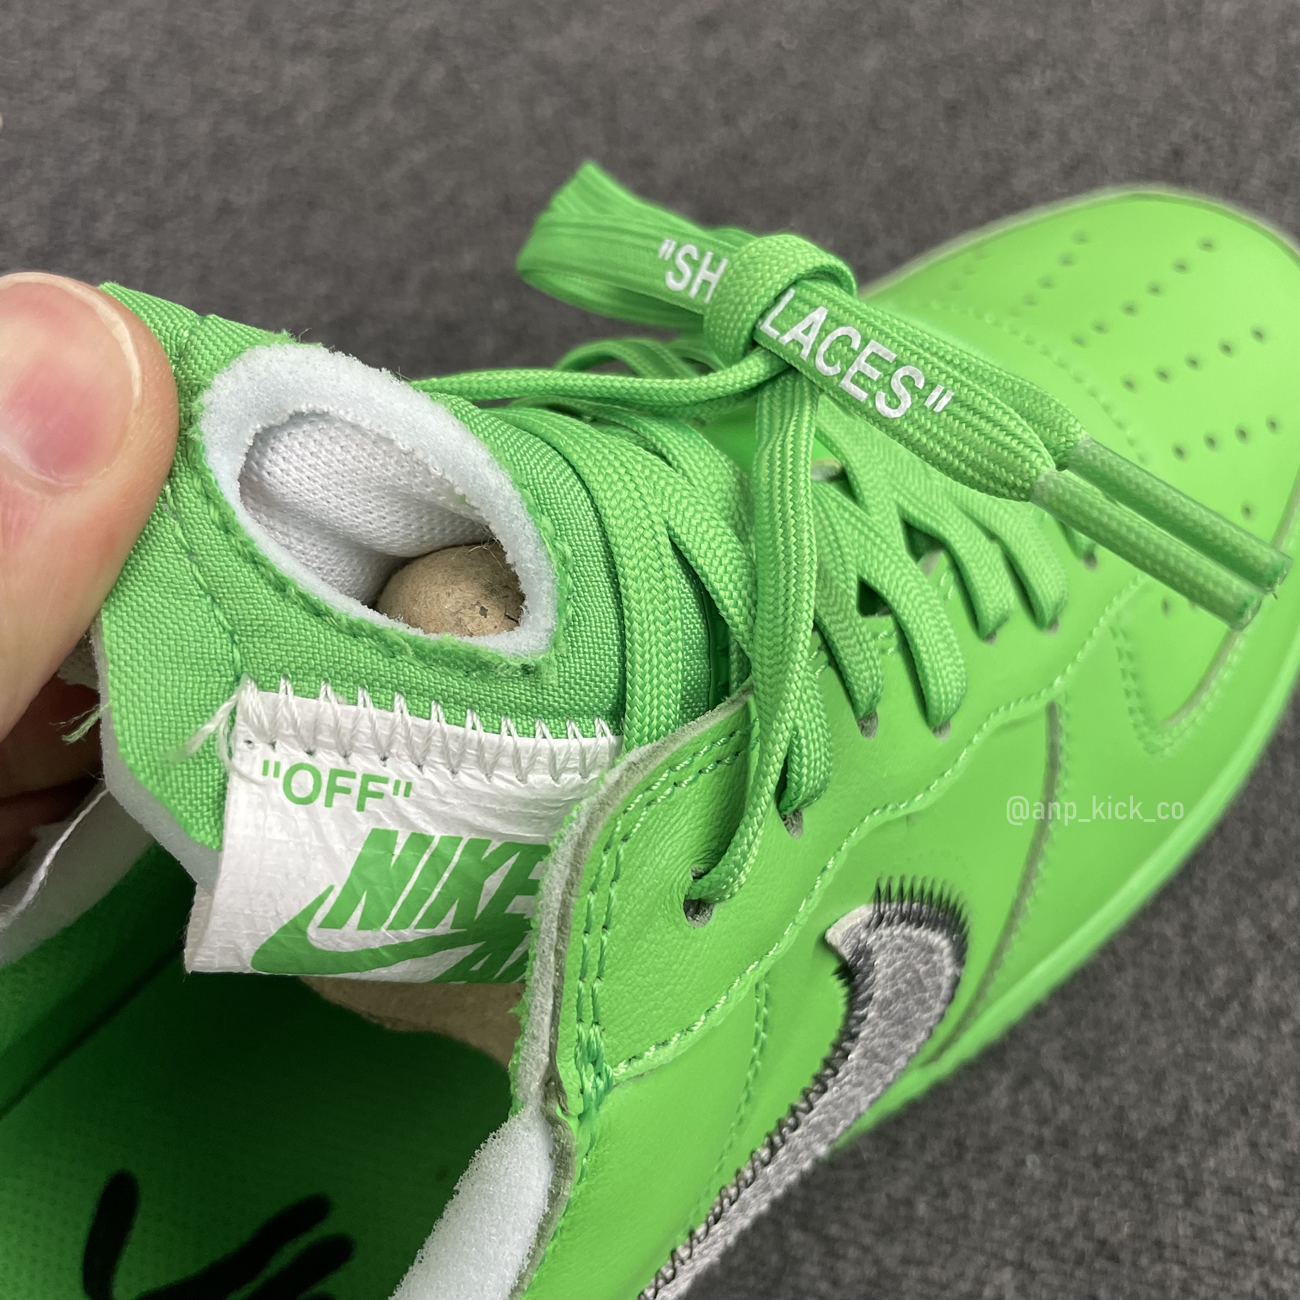 Off White Nike Air Force 1 Low Light Green (15) - newkick.org